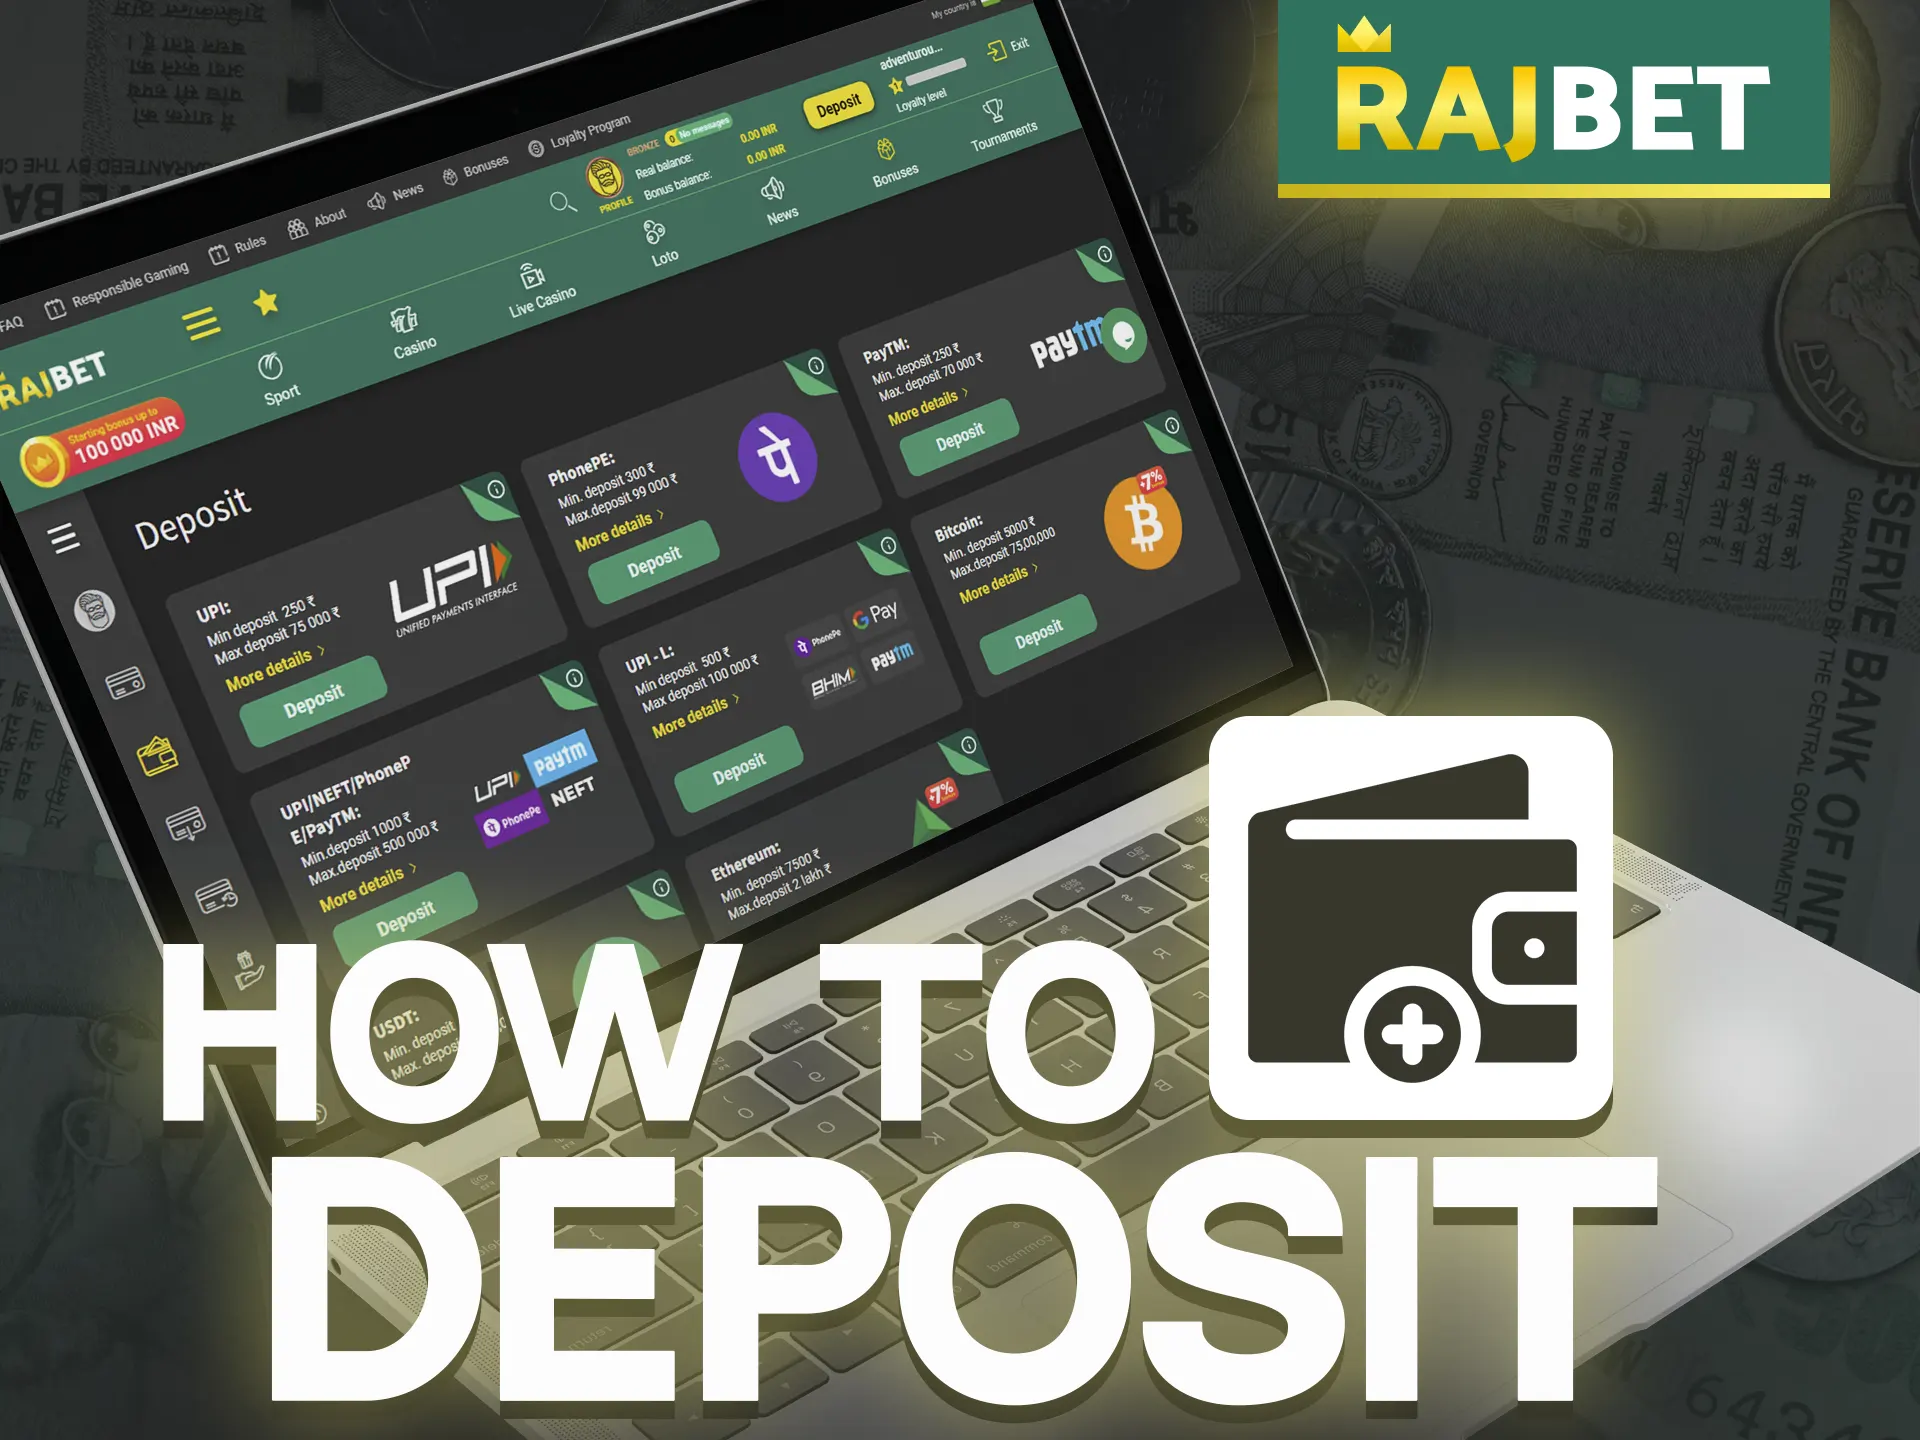 Read the instructions below and make your first deposit at Rajbet online casino.